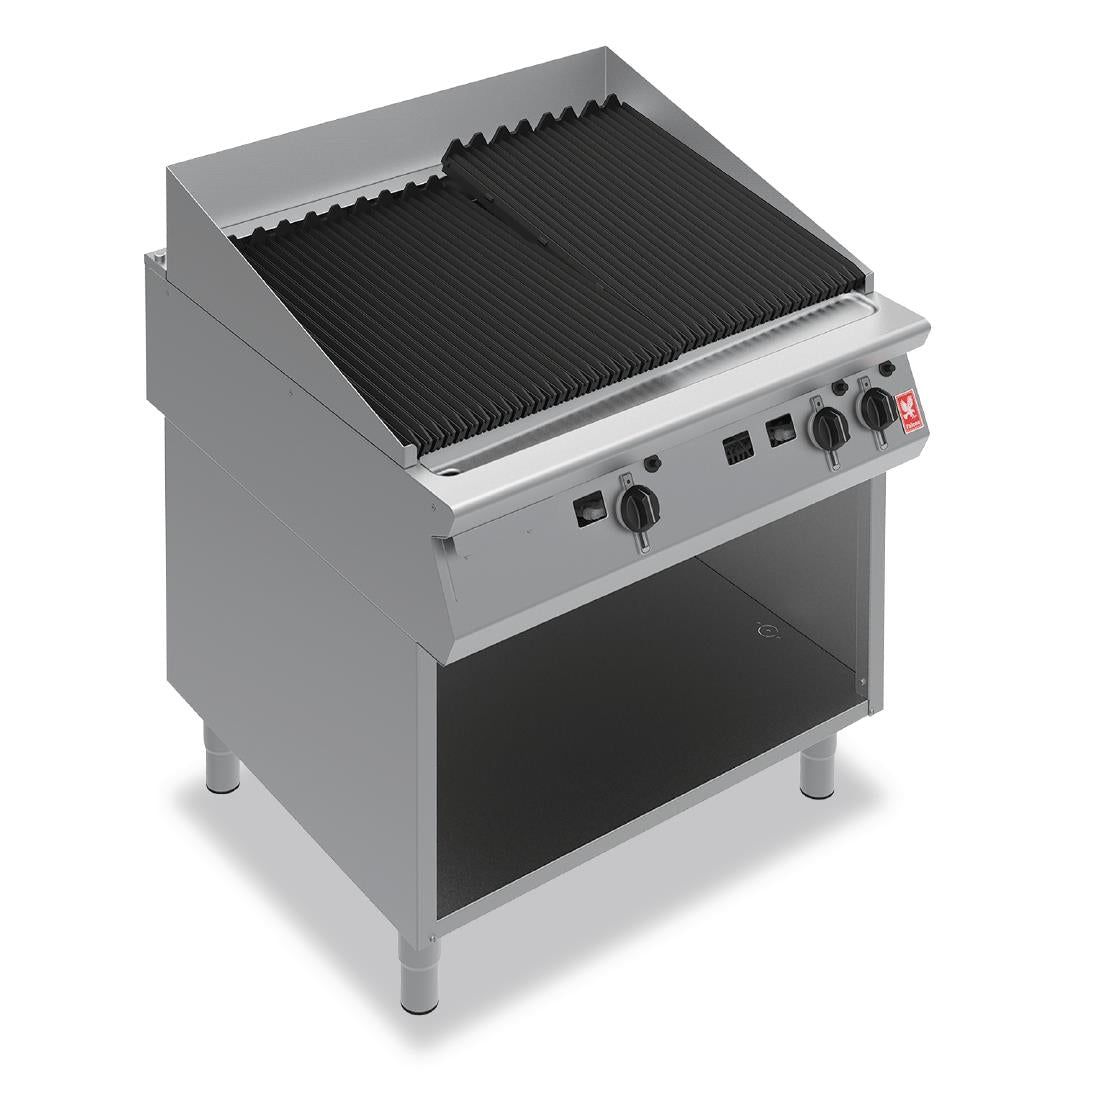 Falcon F900 Chargrill on Fixed Stand Propane Gas G9490